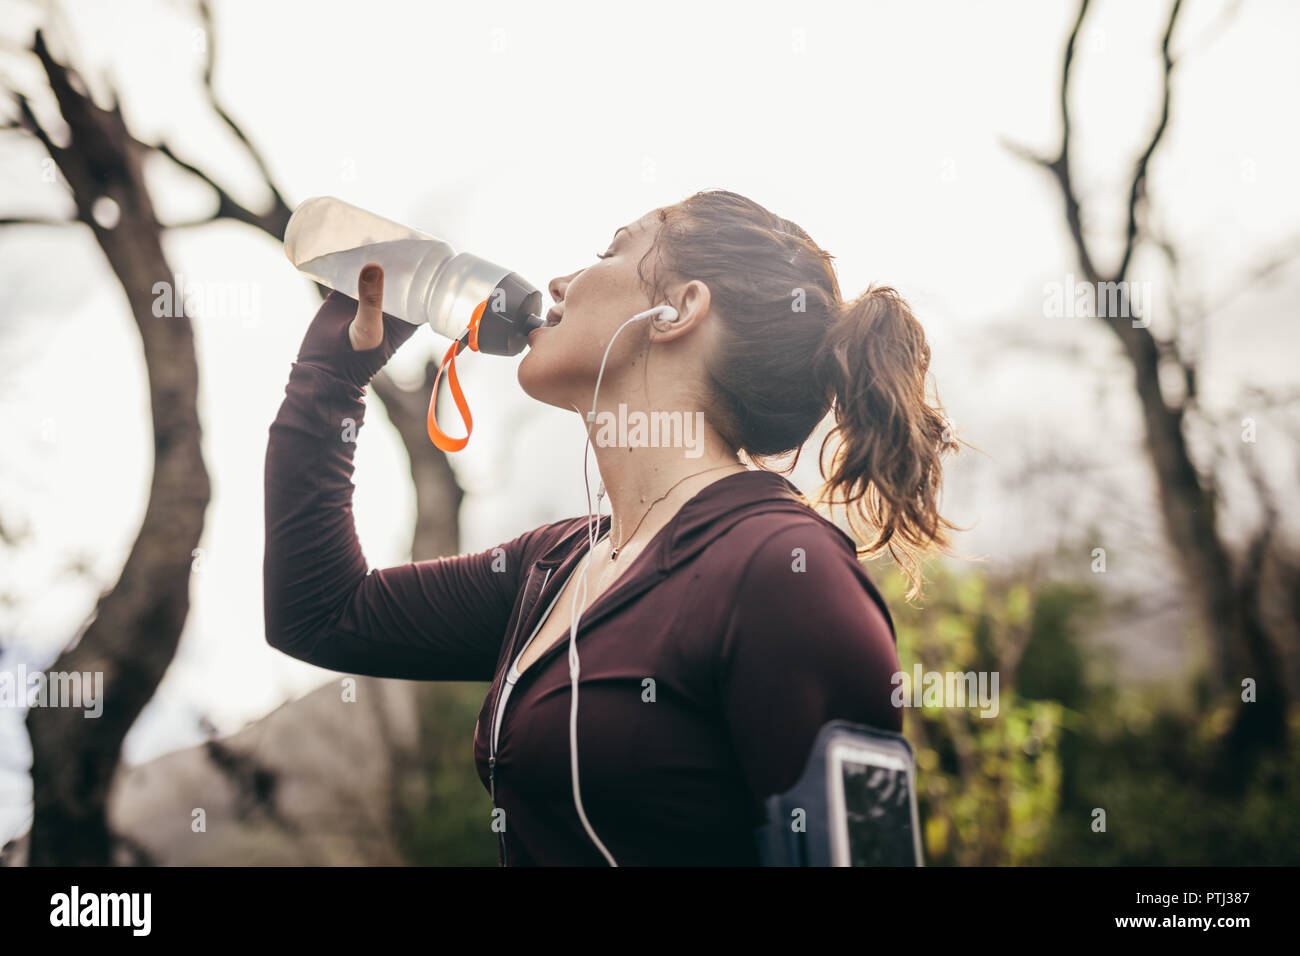 Woman drinking water after a running exercise outdoors. Female runner taking a break and drinking water from bottle in morning. Stock Photo